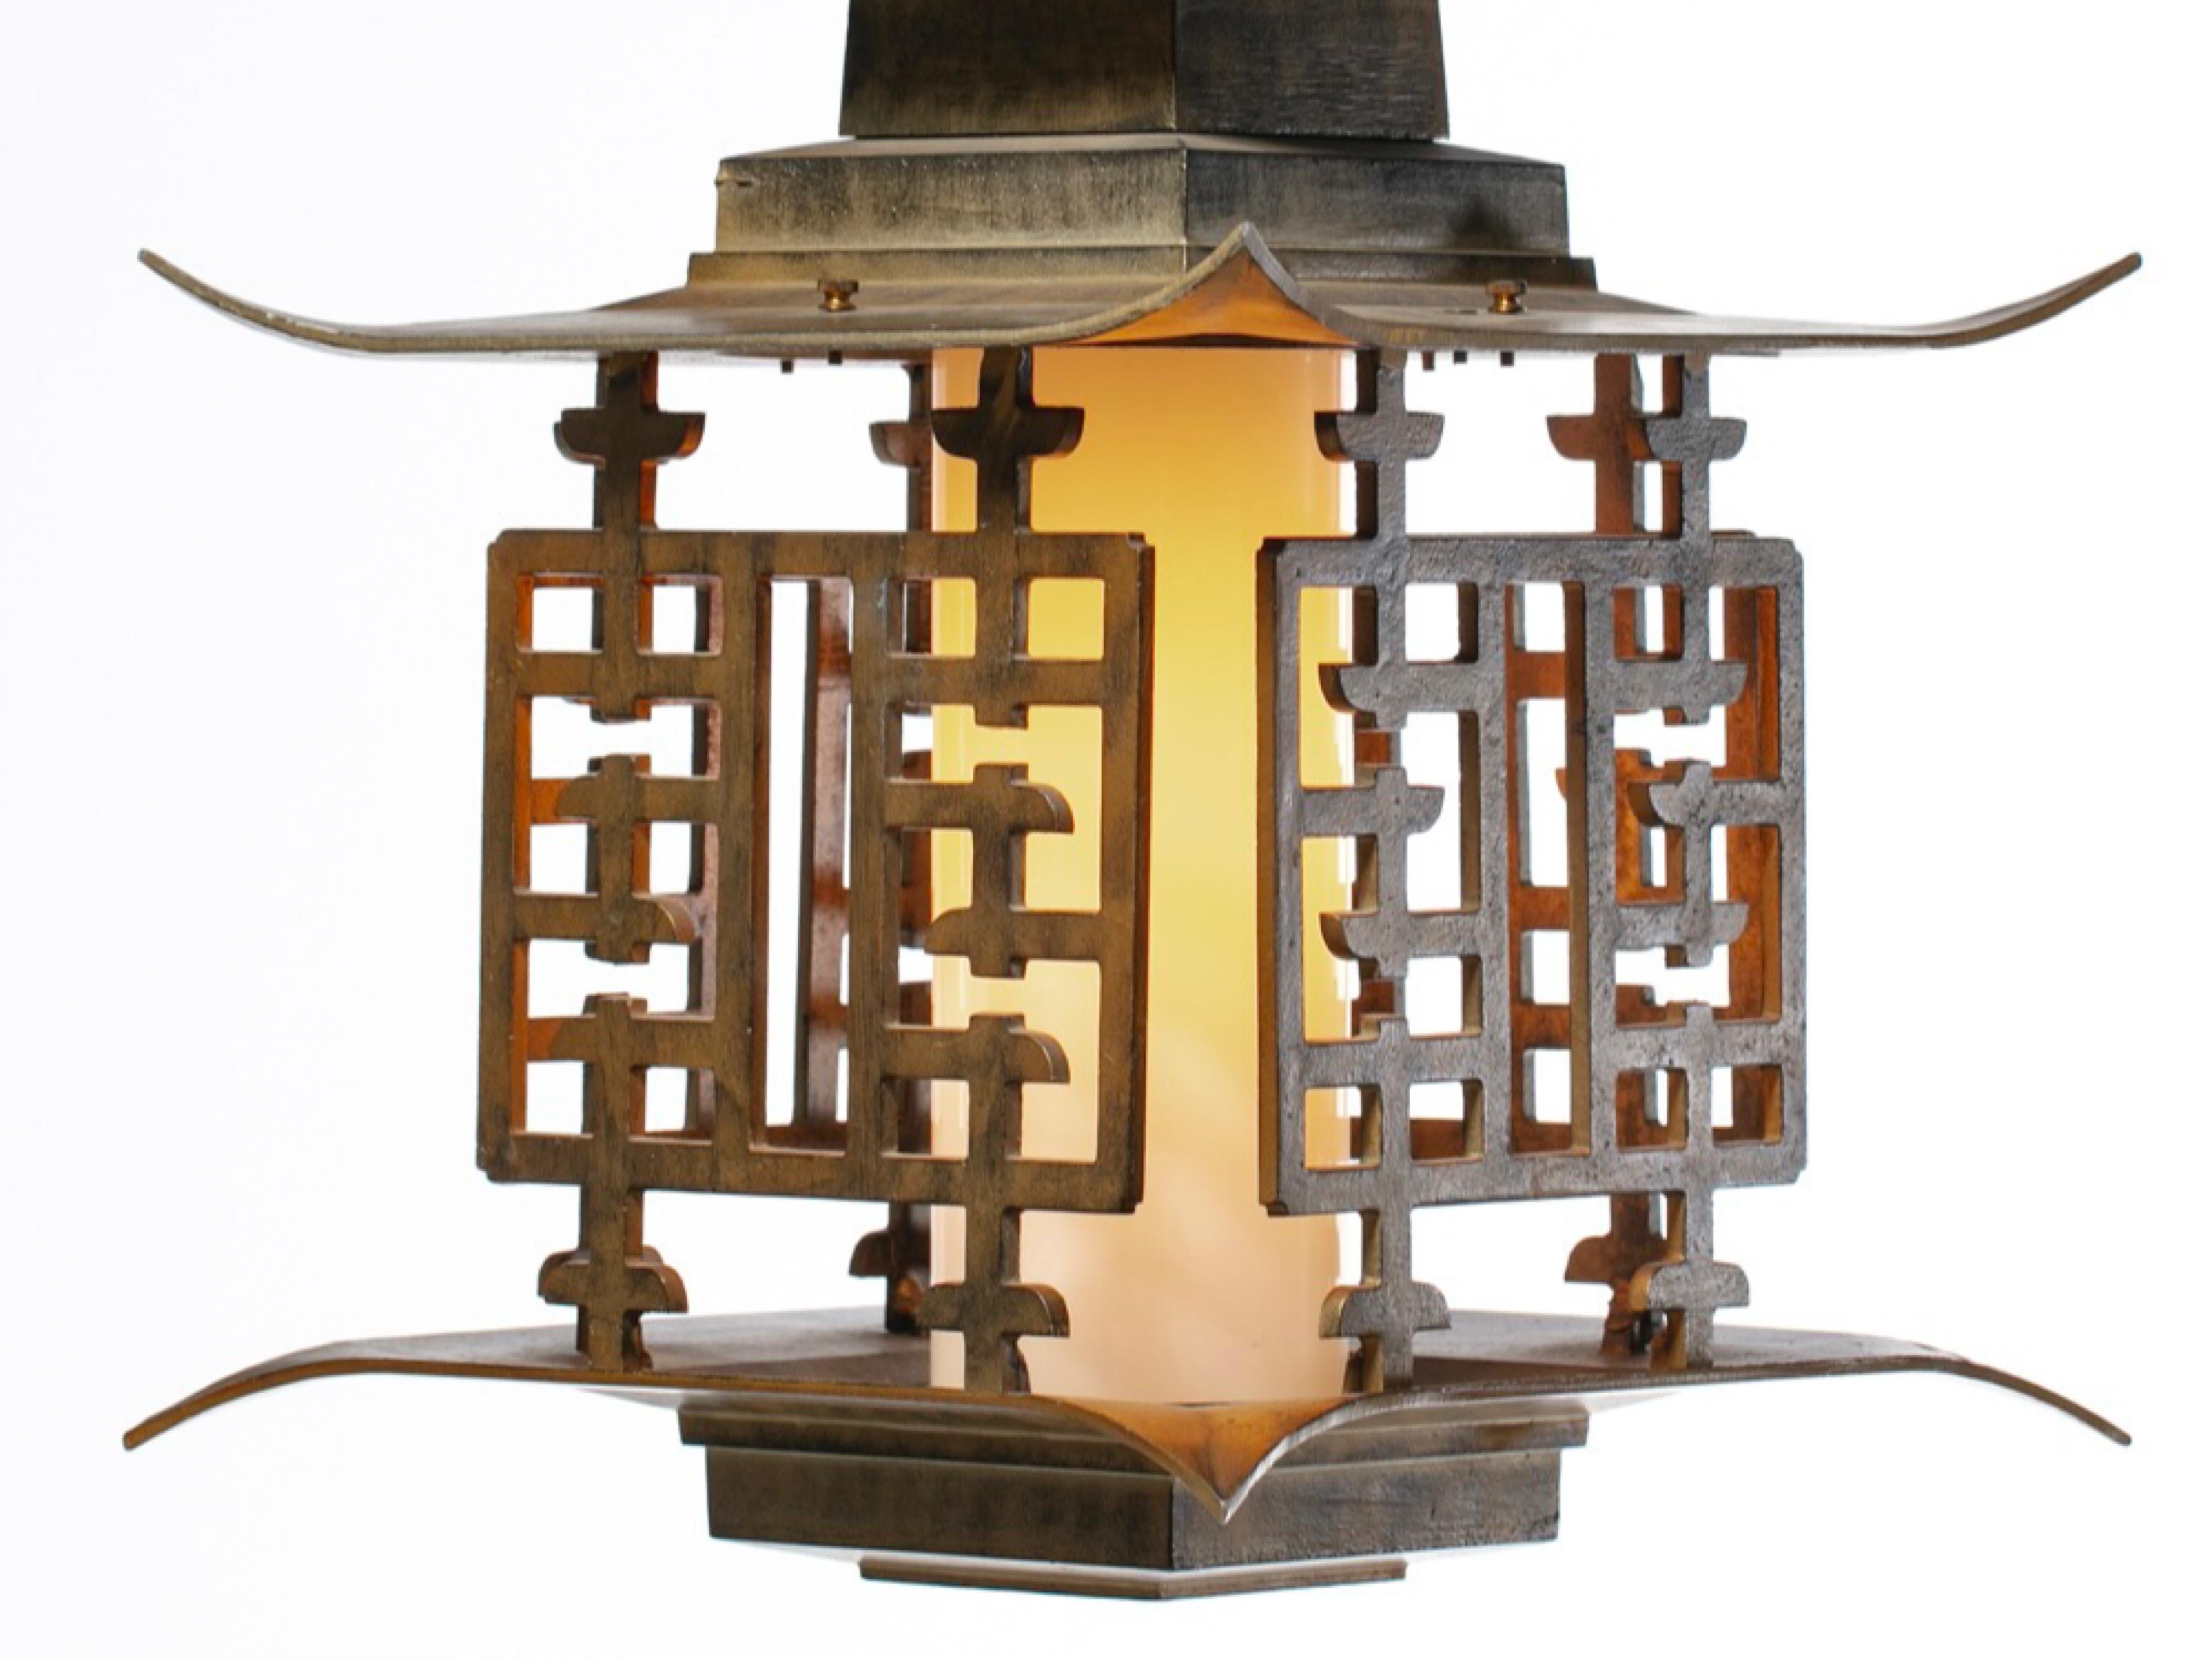 This large and majestic mid century pagoda lantern is of the sort aficionados and collectors of Chinoiserie mid century pieces scoop right up. The Asian lantern checks all the boxes. An authentic Mid Century light fixture sourced from the original